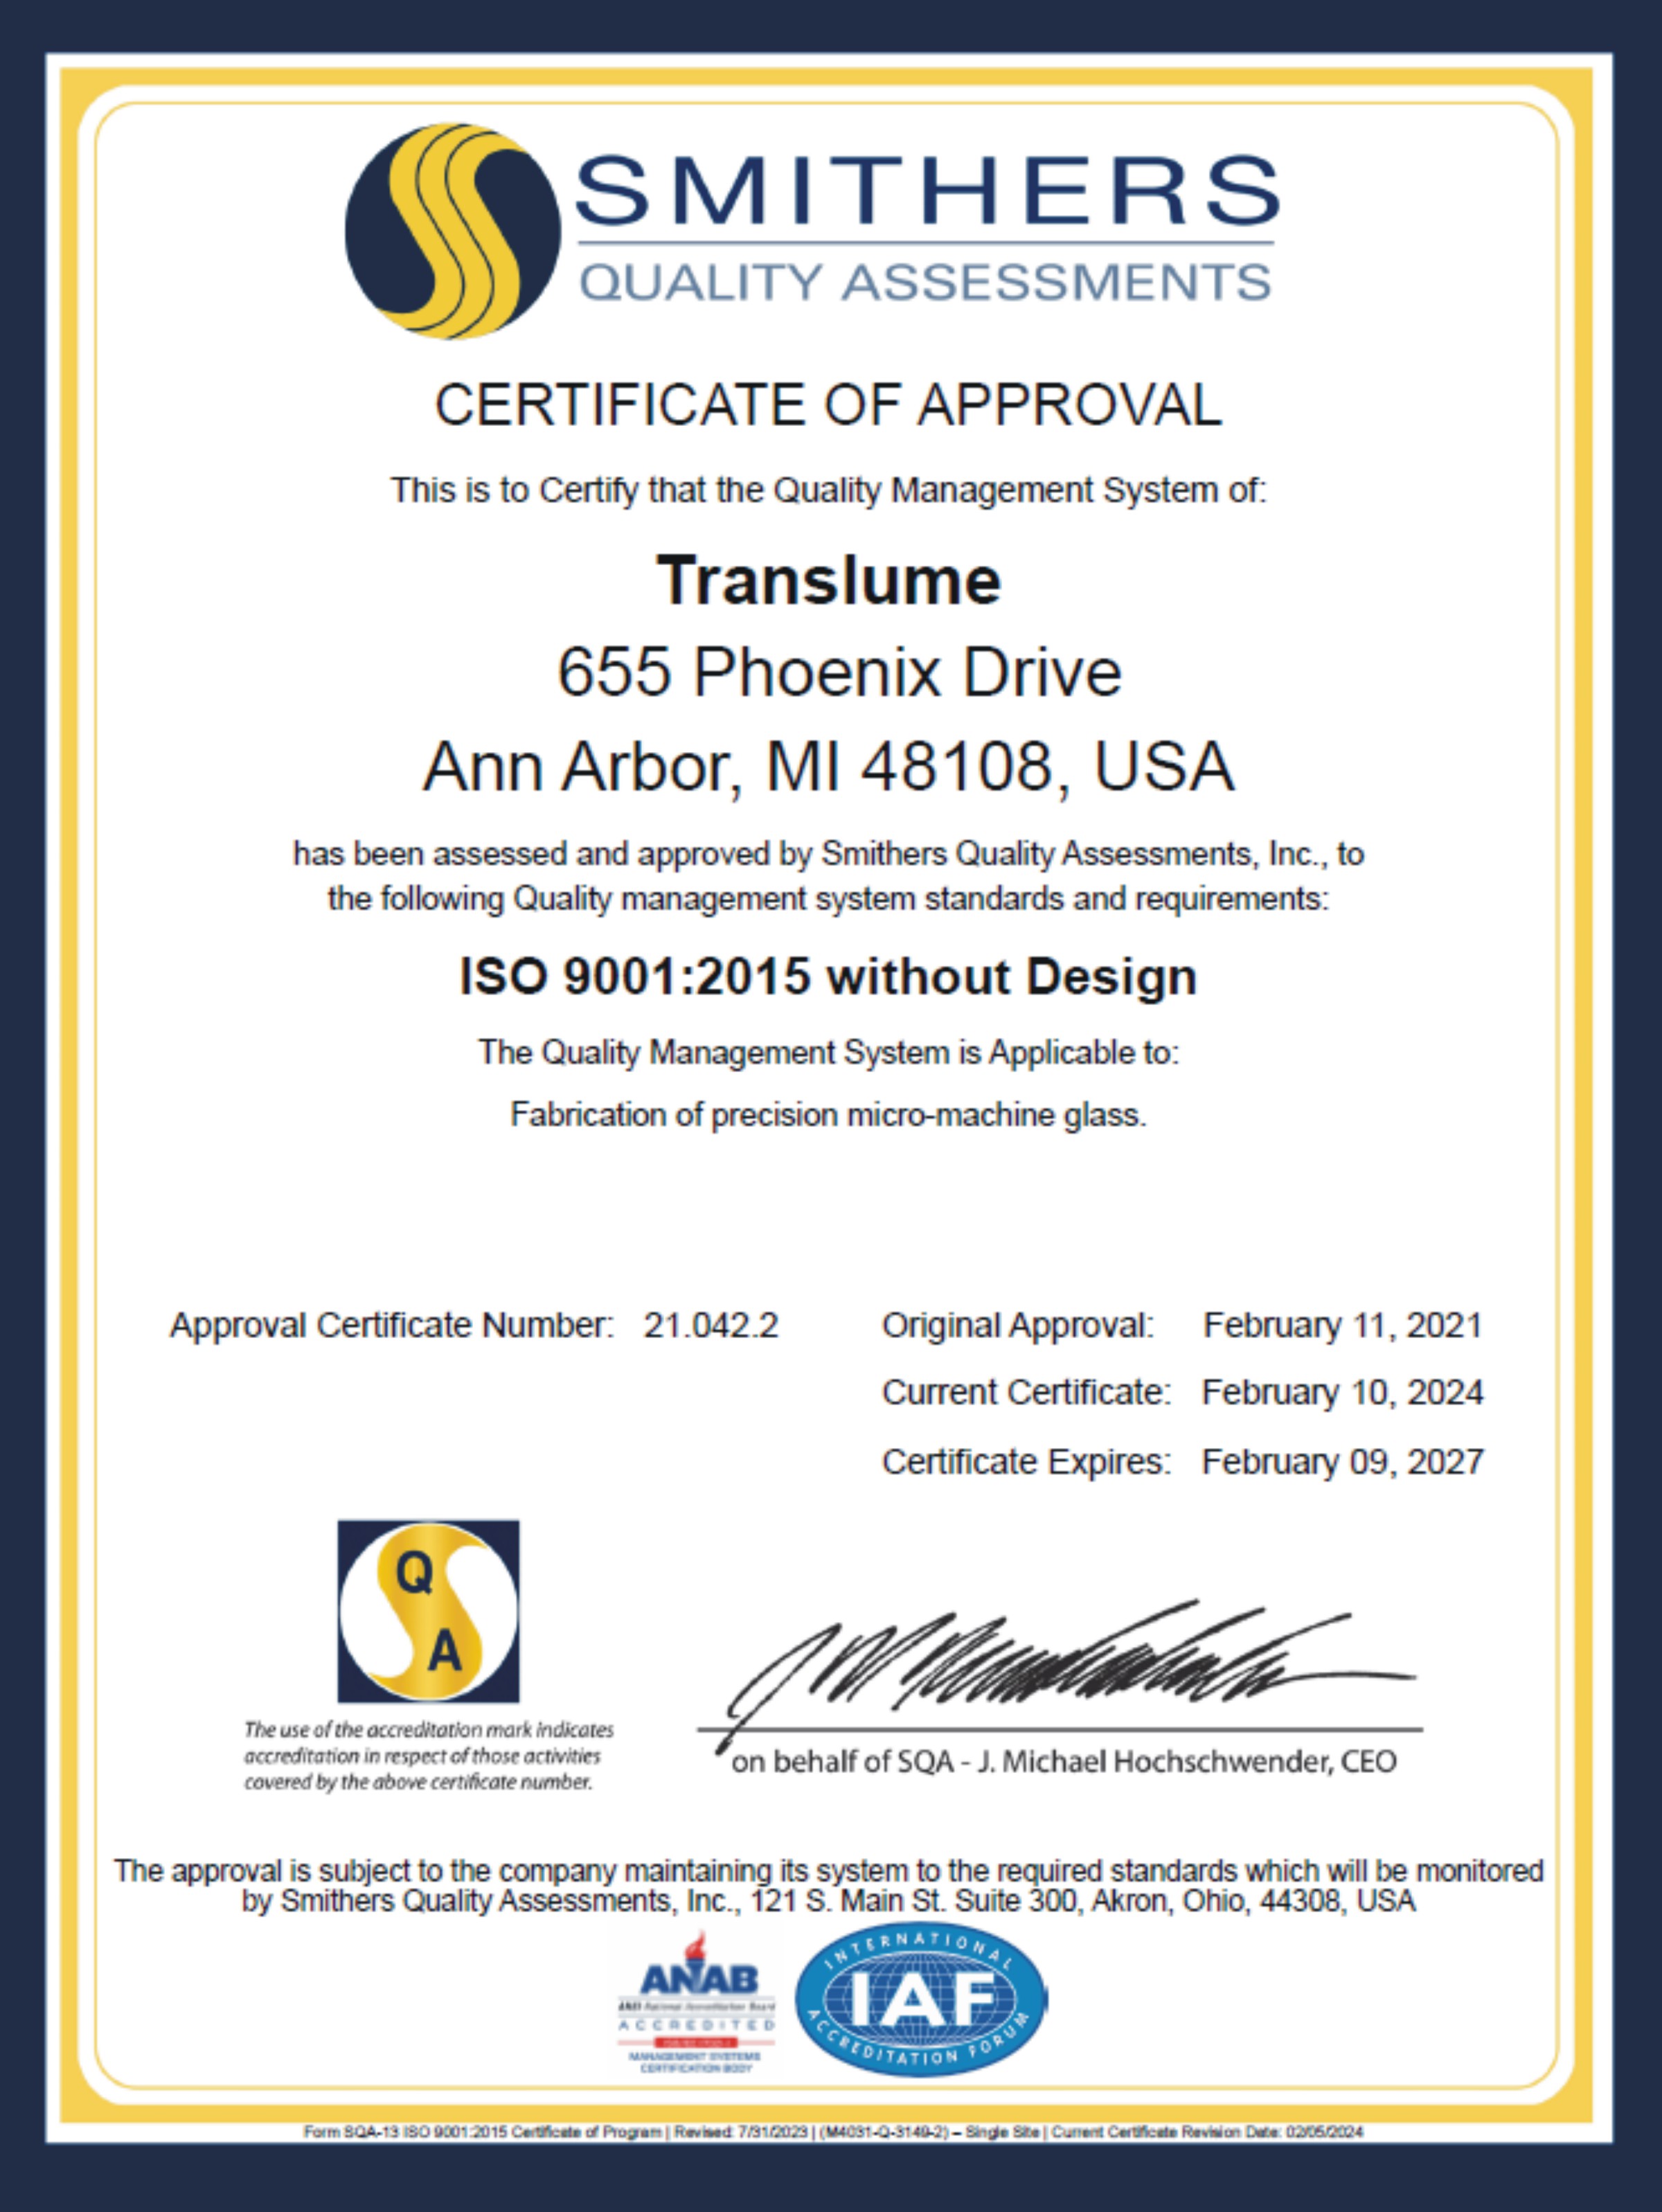 ISO certificate of approval